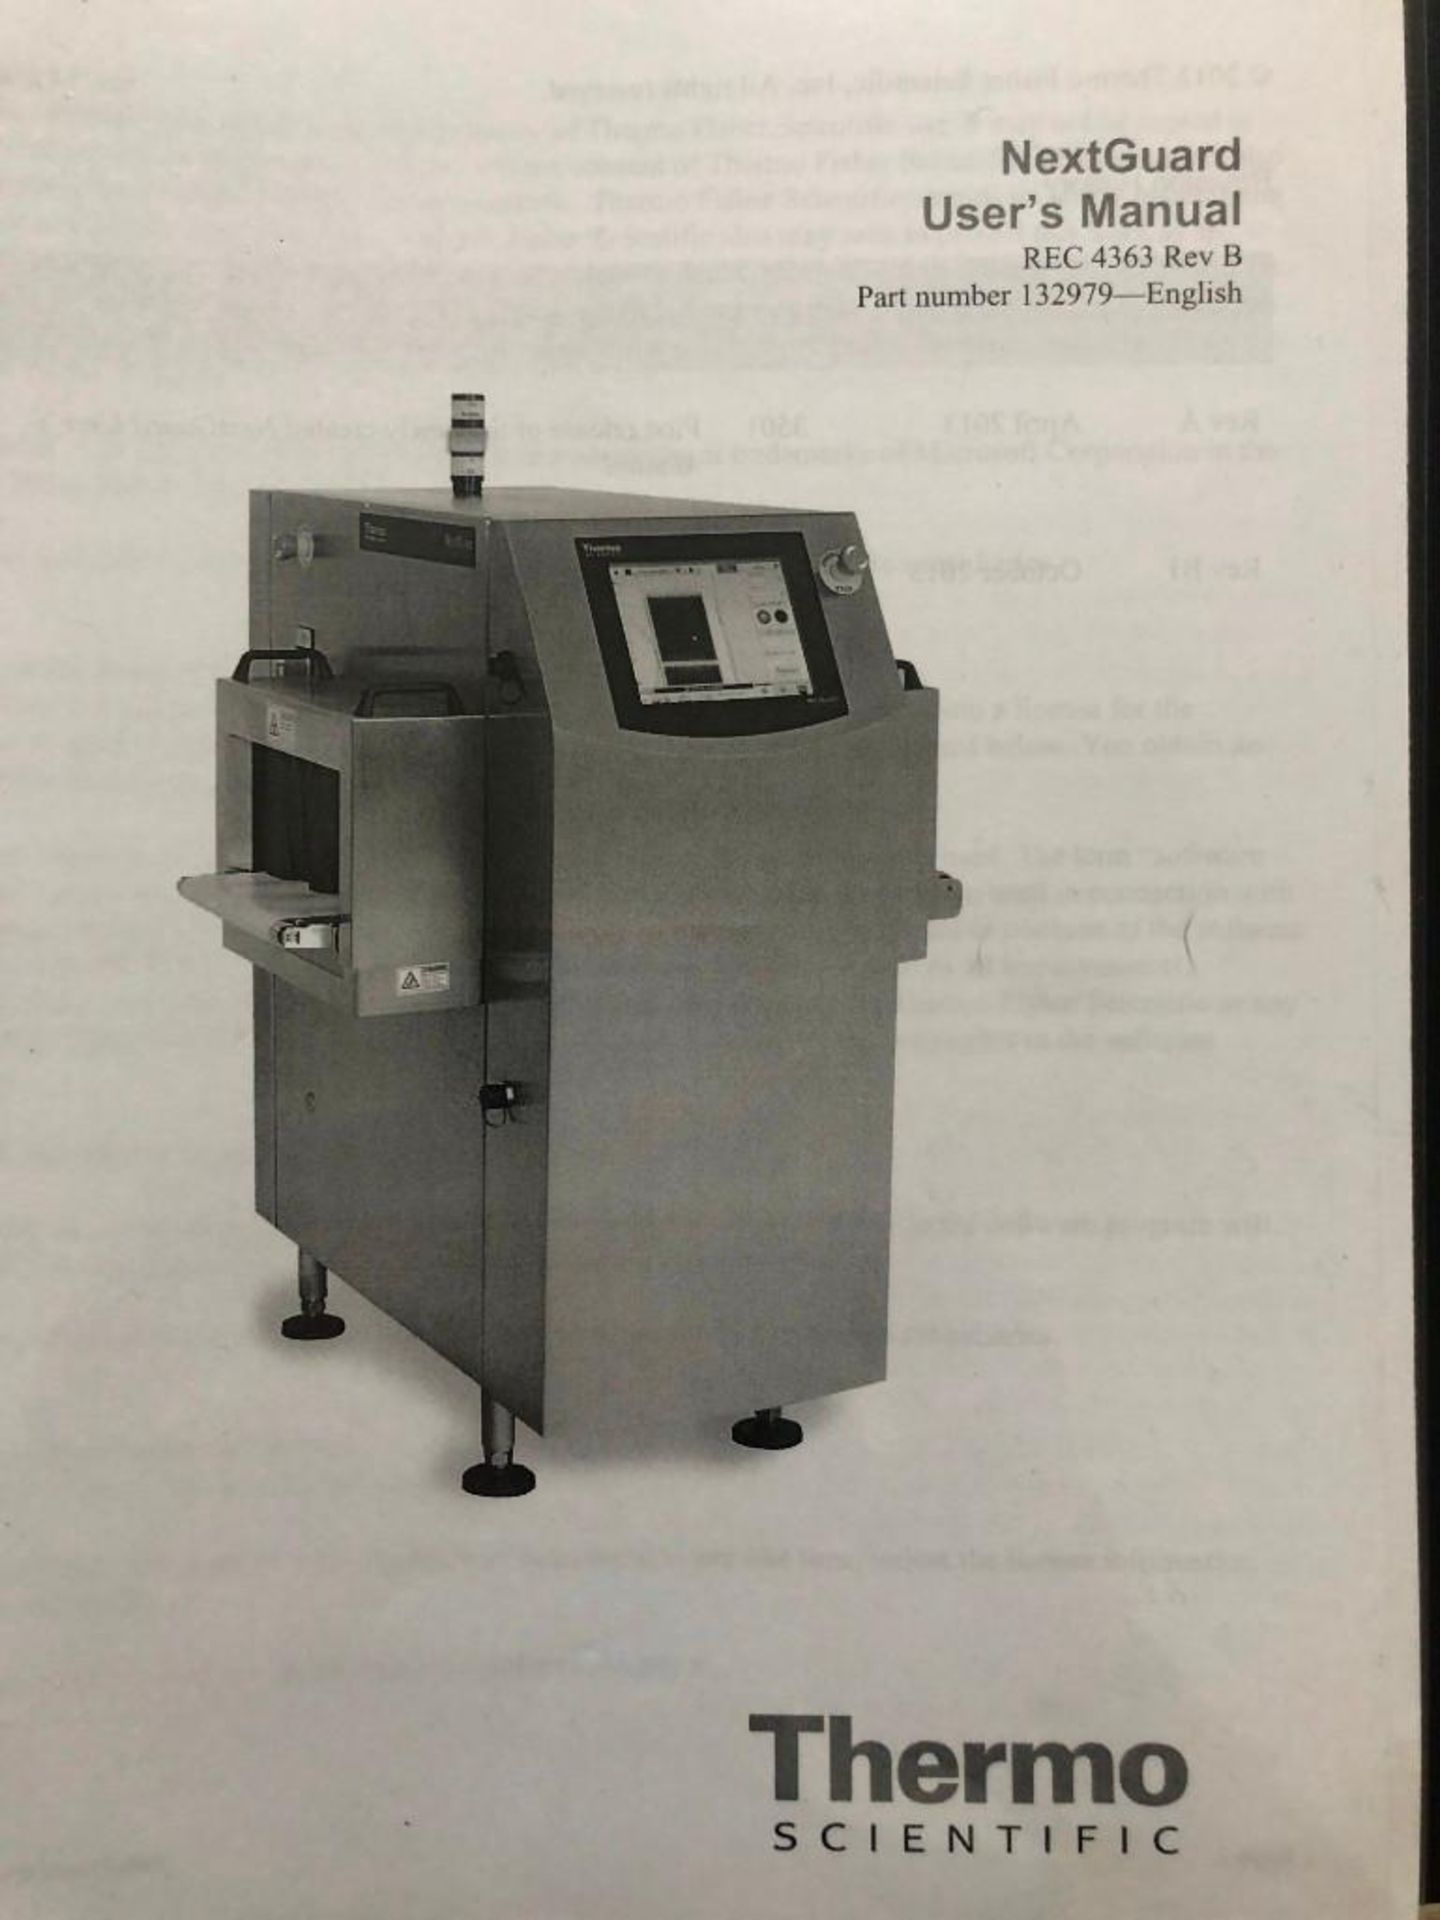 Thermo Scientific Next Guard X-ray Inspection system - Image 12 of 13